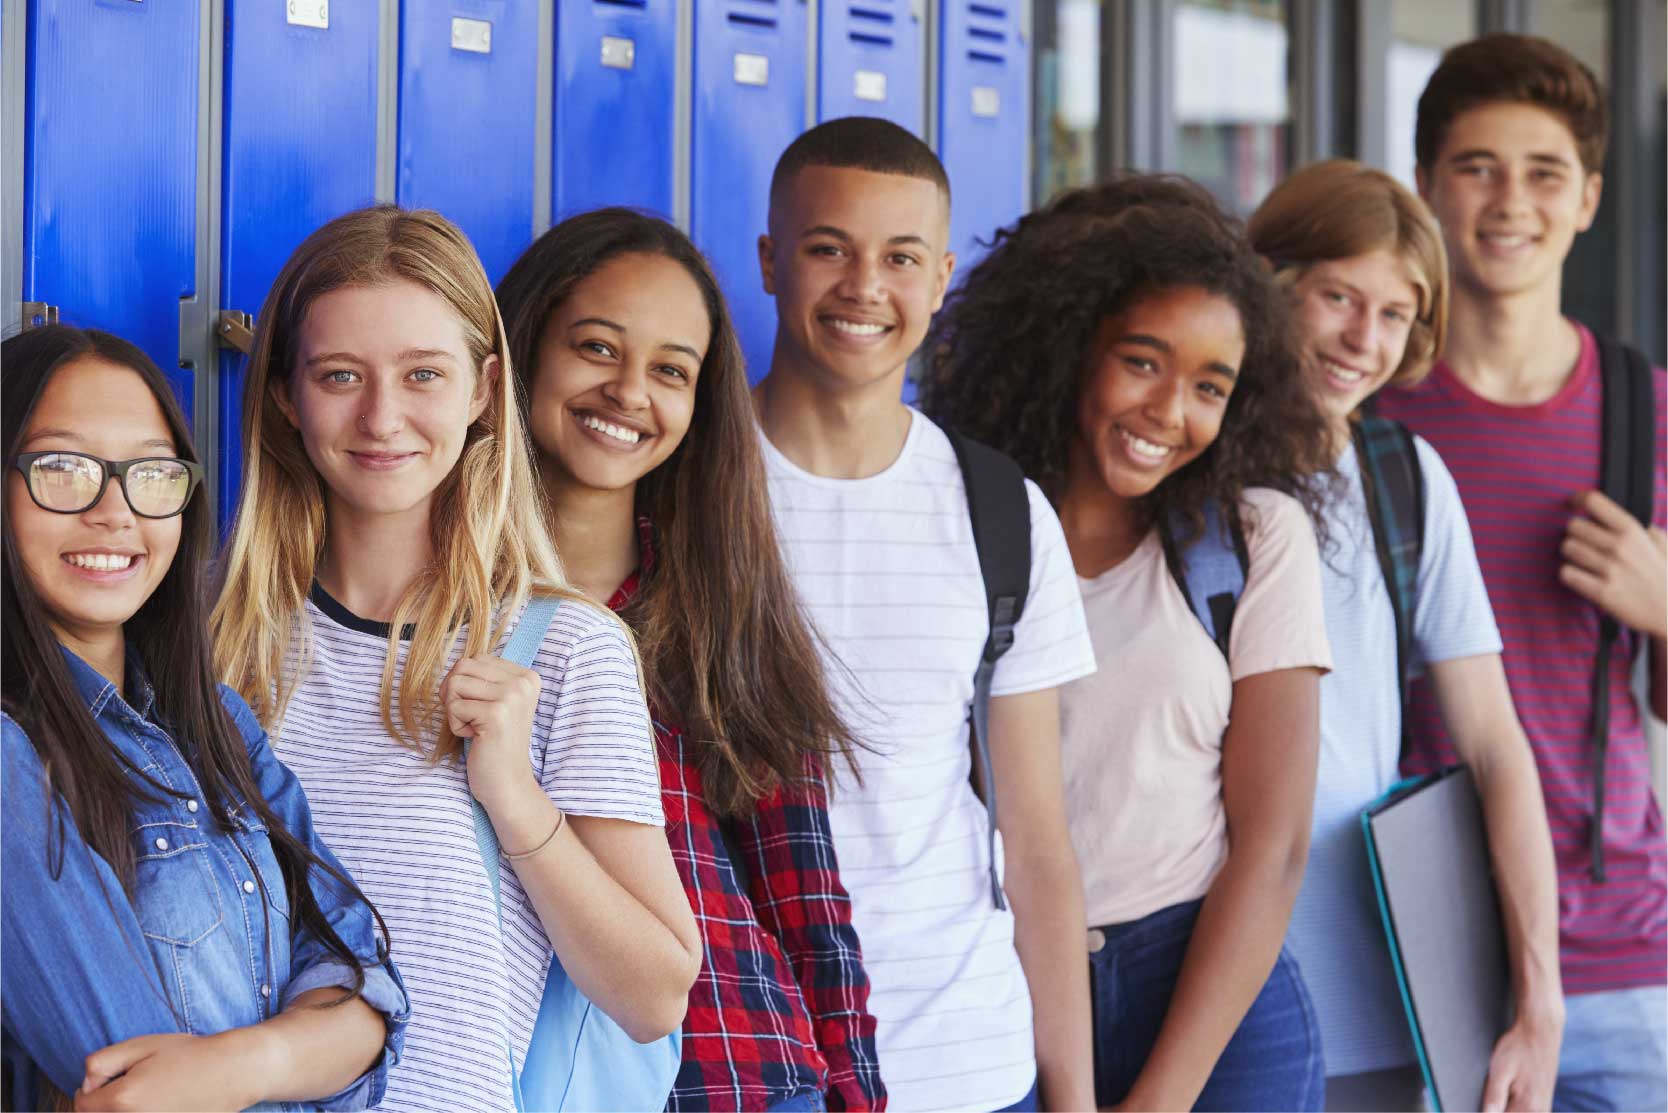 A group of diverse teens pose and smile in front of blue lockers